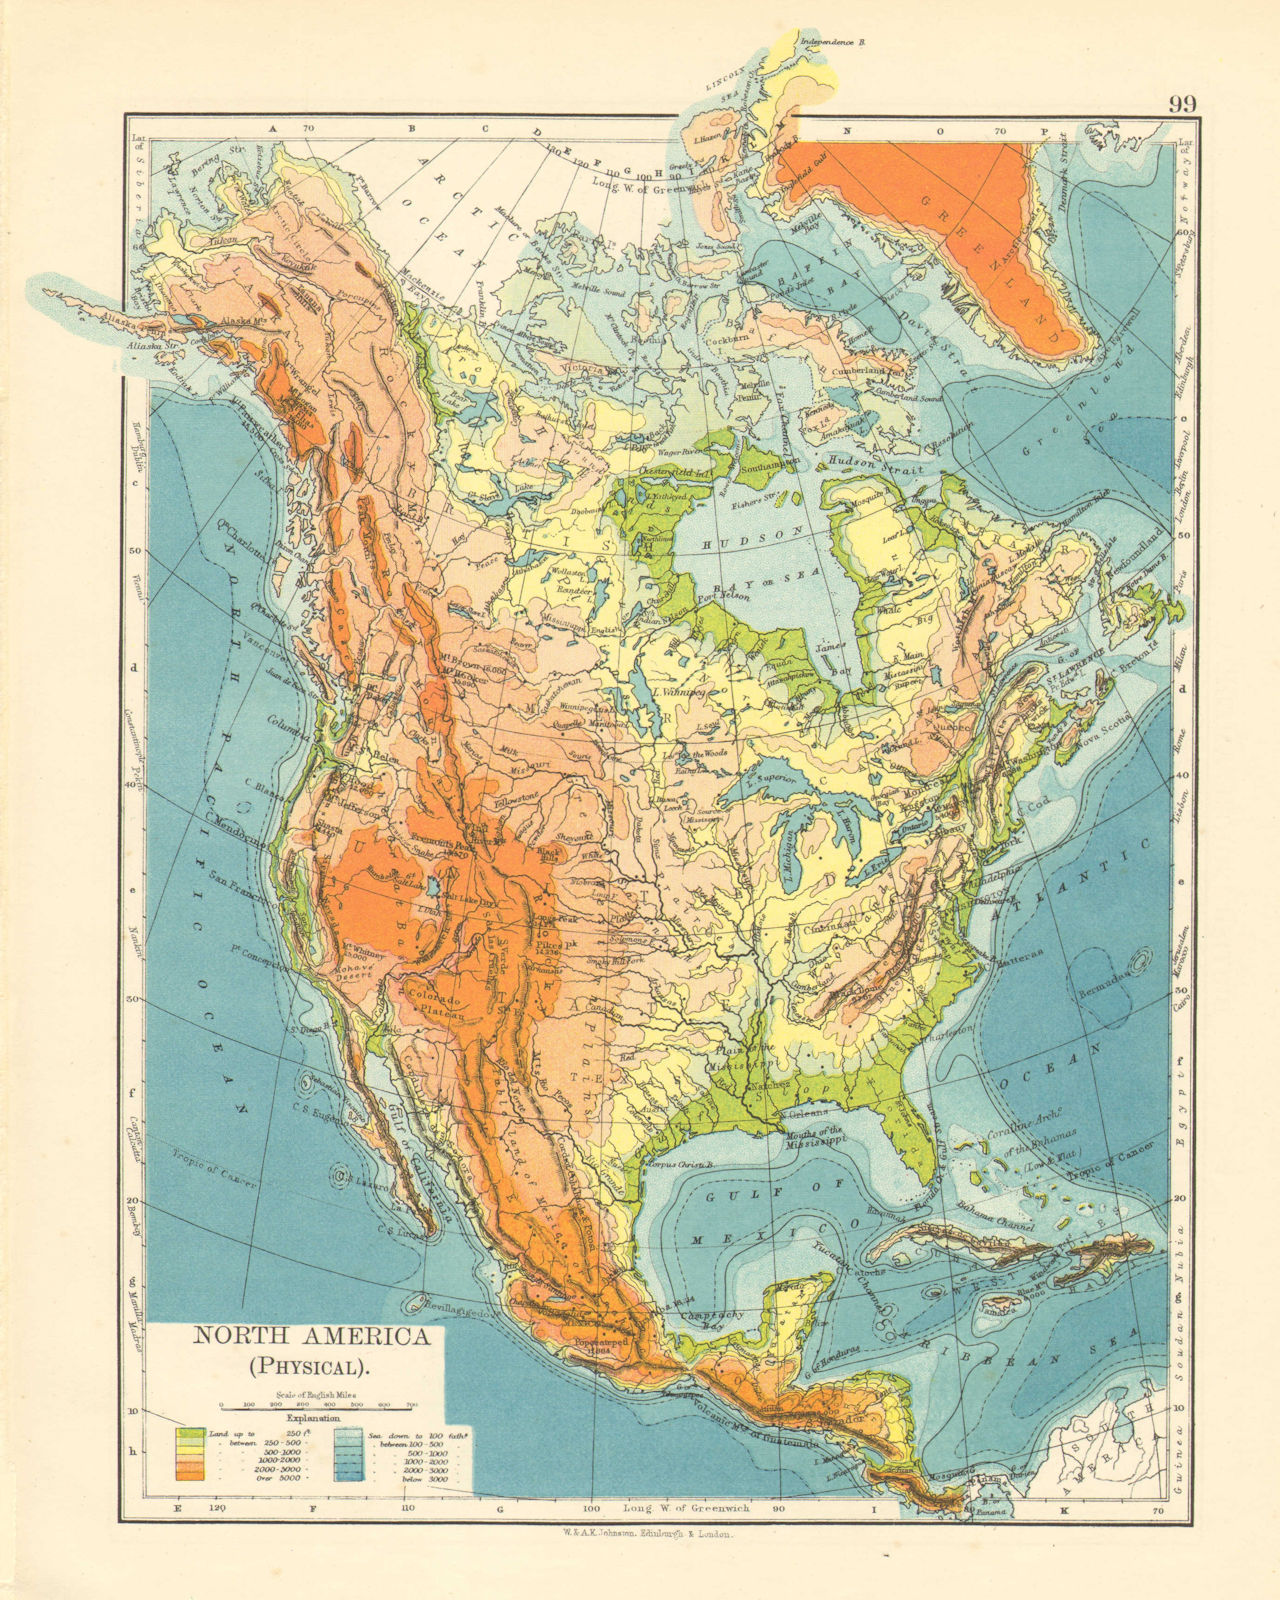 NORTH AMERICA PHYSICAL. Relief. Key mountains heights. Ocean depths  1899 map